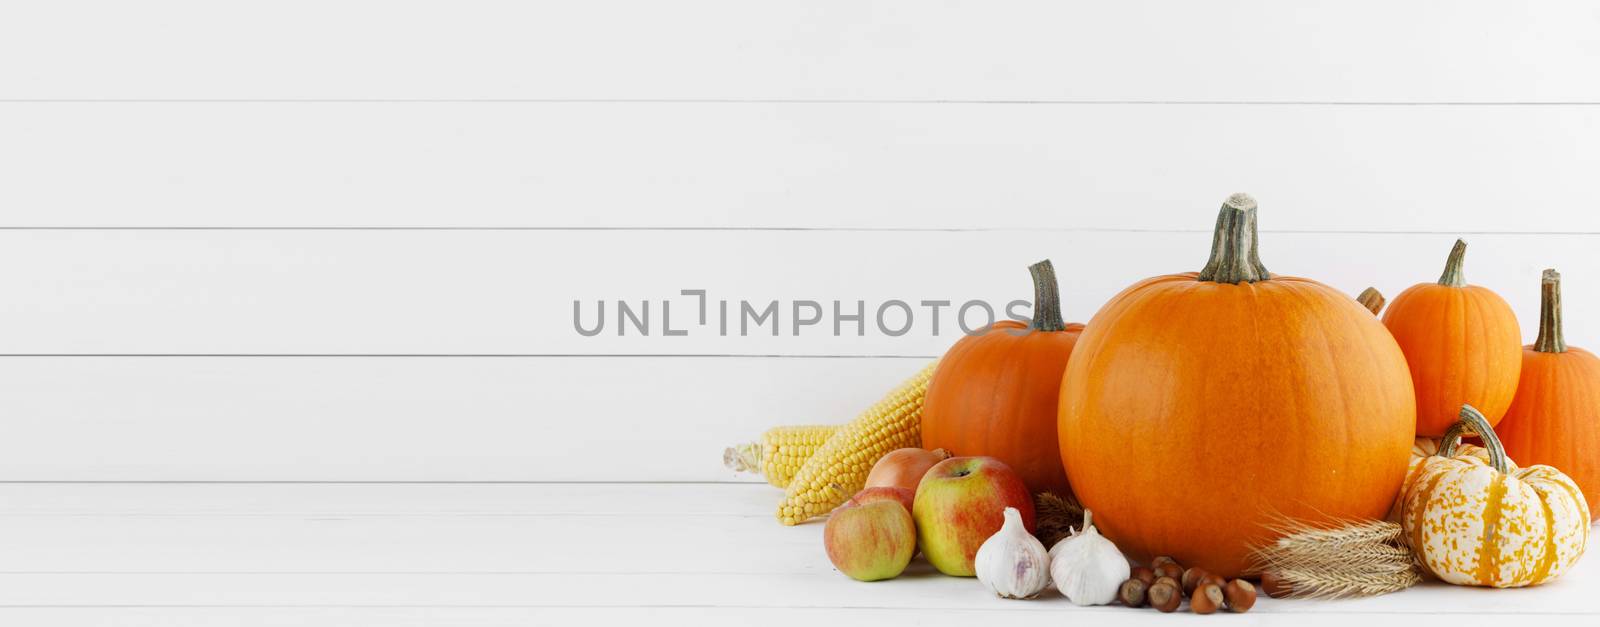 Autumn harvest still life with pumpkins, wheat ears, corn, garlic, onion and apples on wooden background